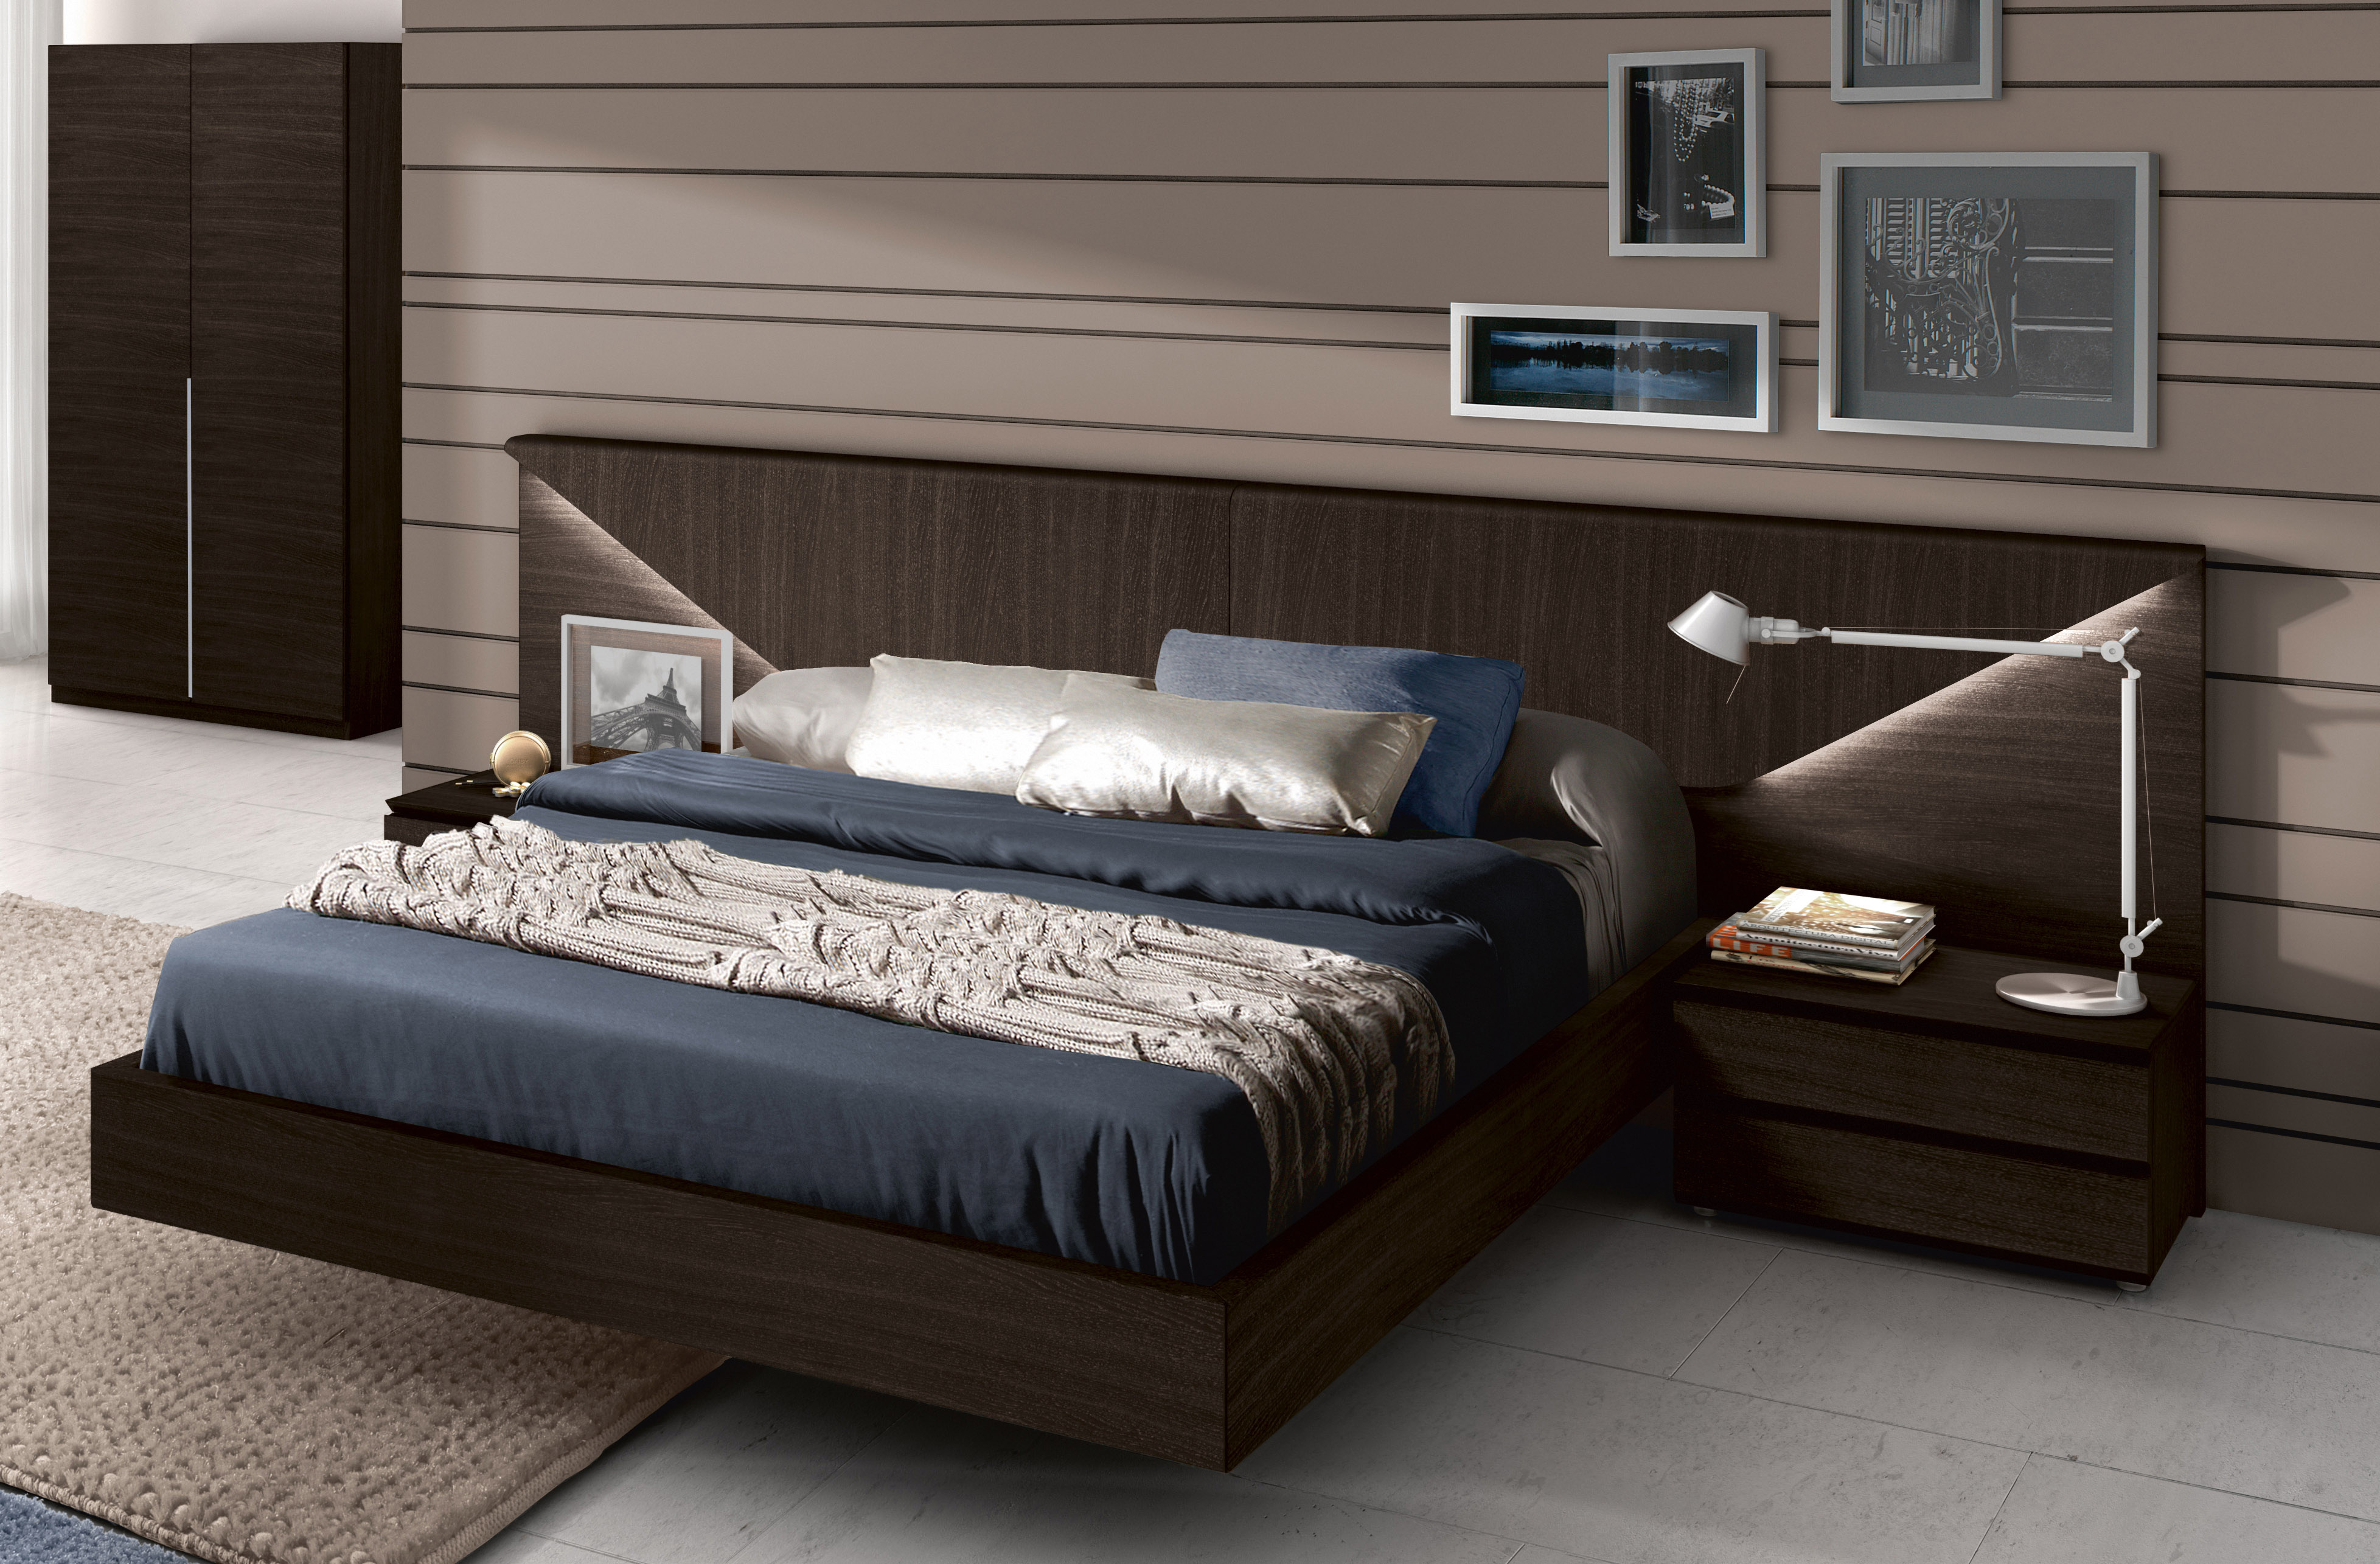 Made in Spain Wood Modern Platform Bed Indianapolis ...
